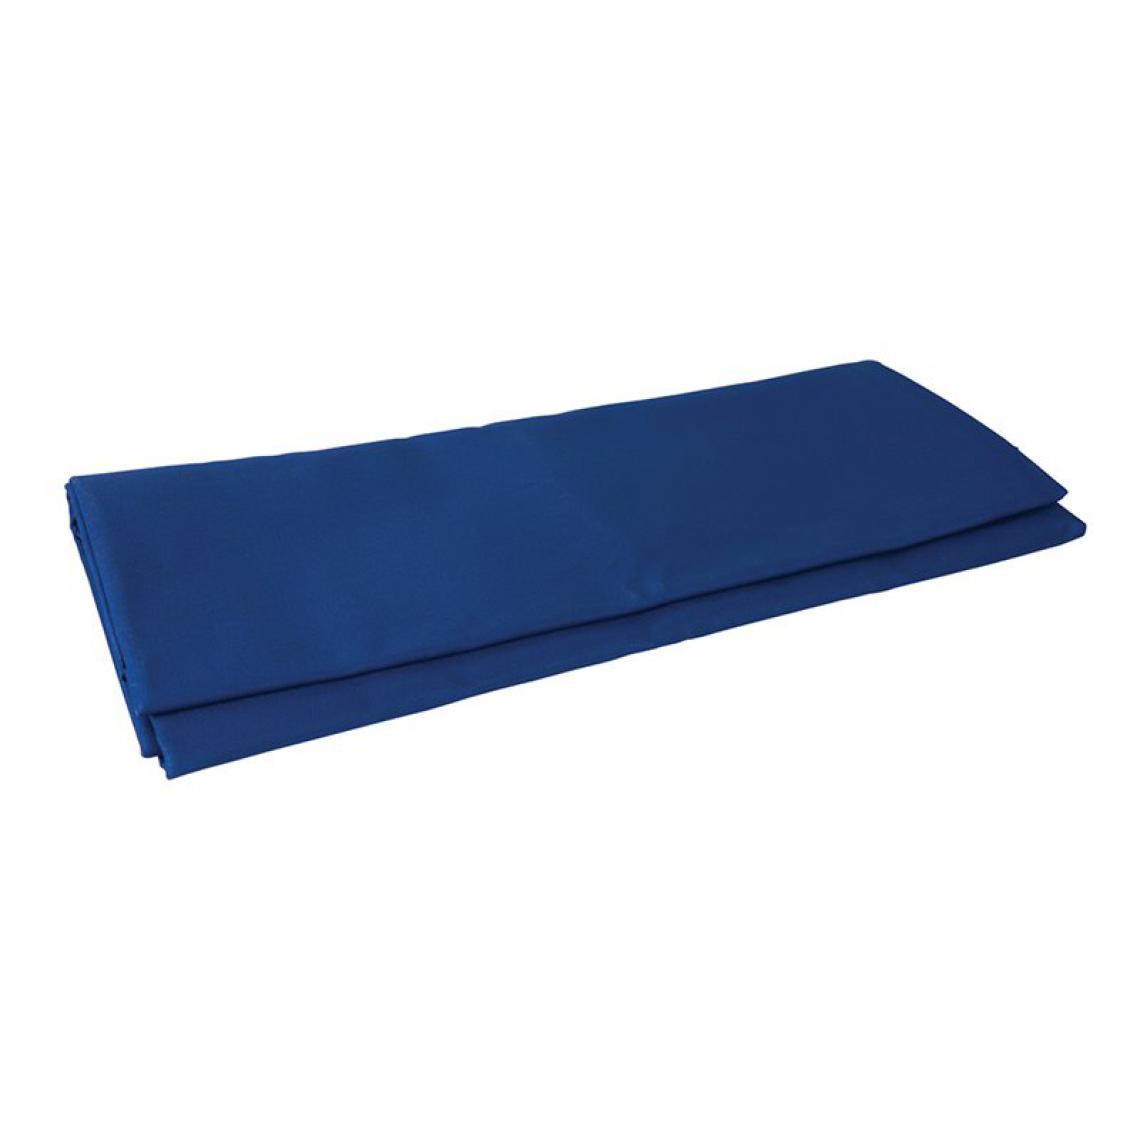 Dickie - Tapis de plombier - 1,35 x 0,8 m - Mastic, silicone, joint